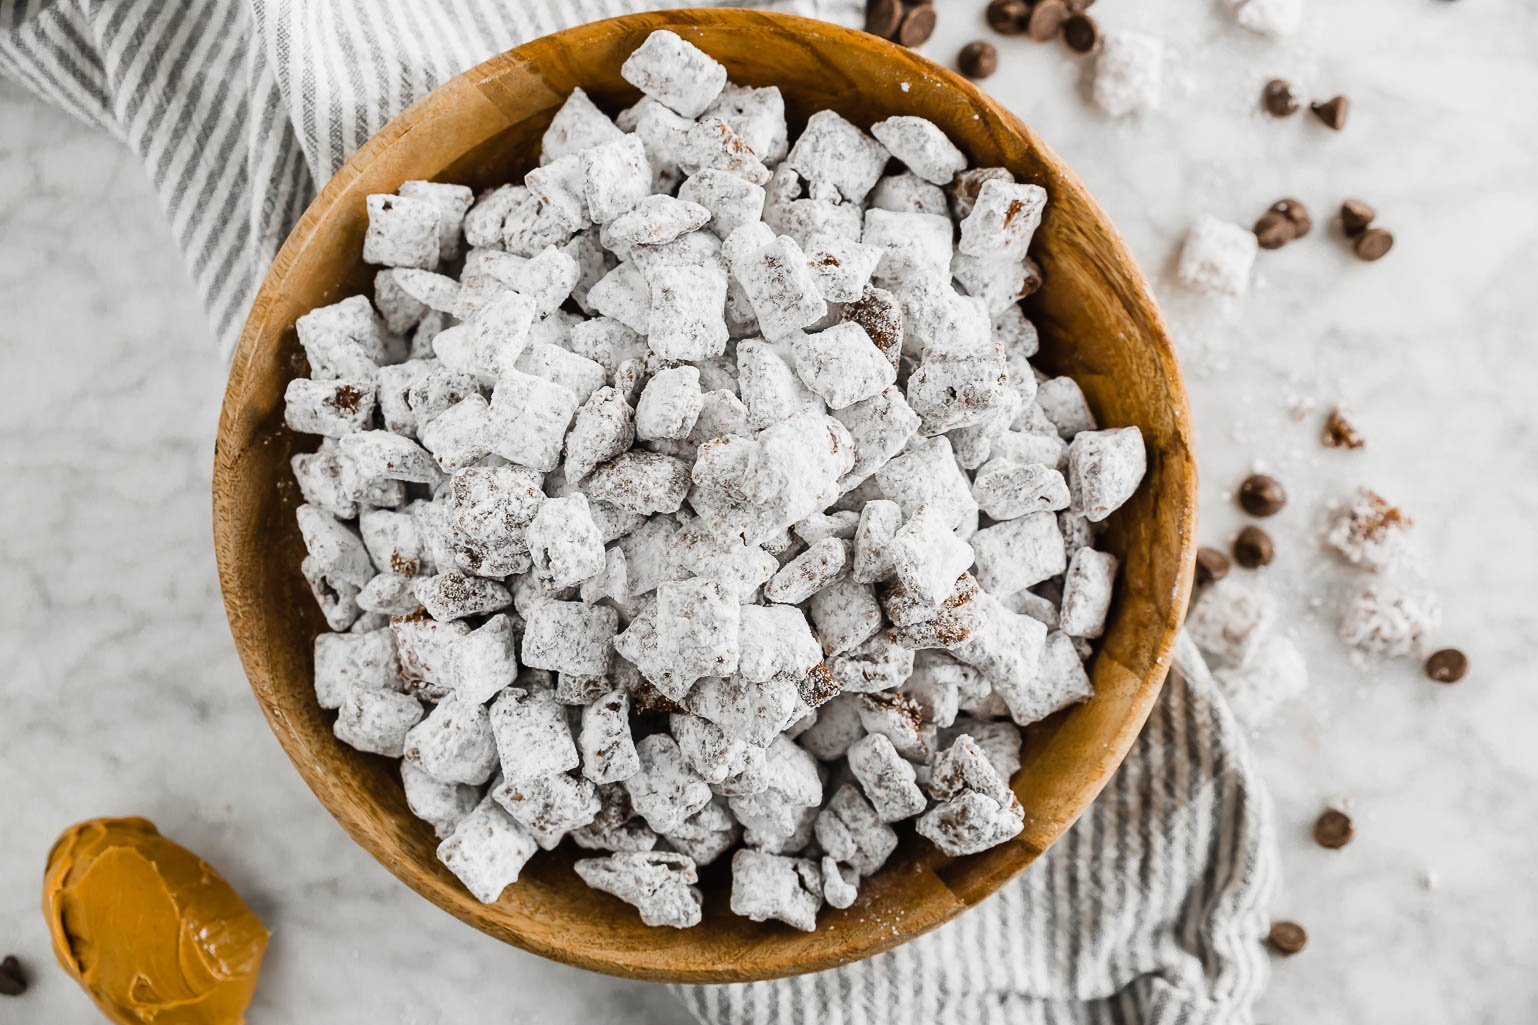 Dairy-free puppy chow in a wooden bowl with a spoonful of peanut butter and chocolate chips and powdered sugar on a linen napkin and table.